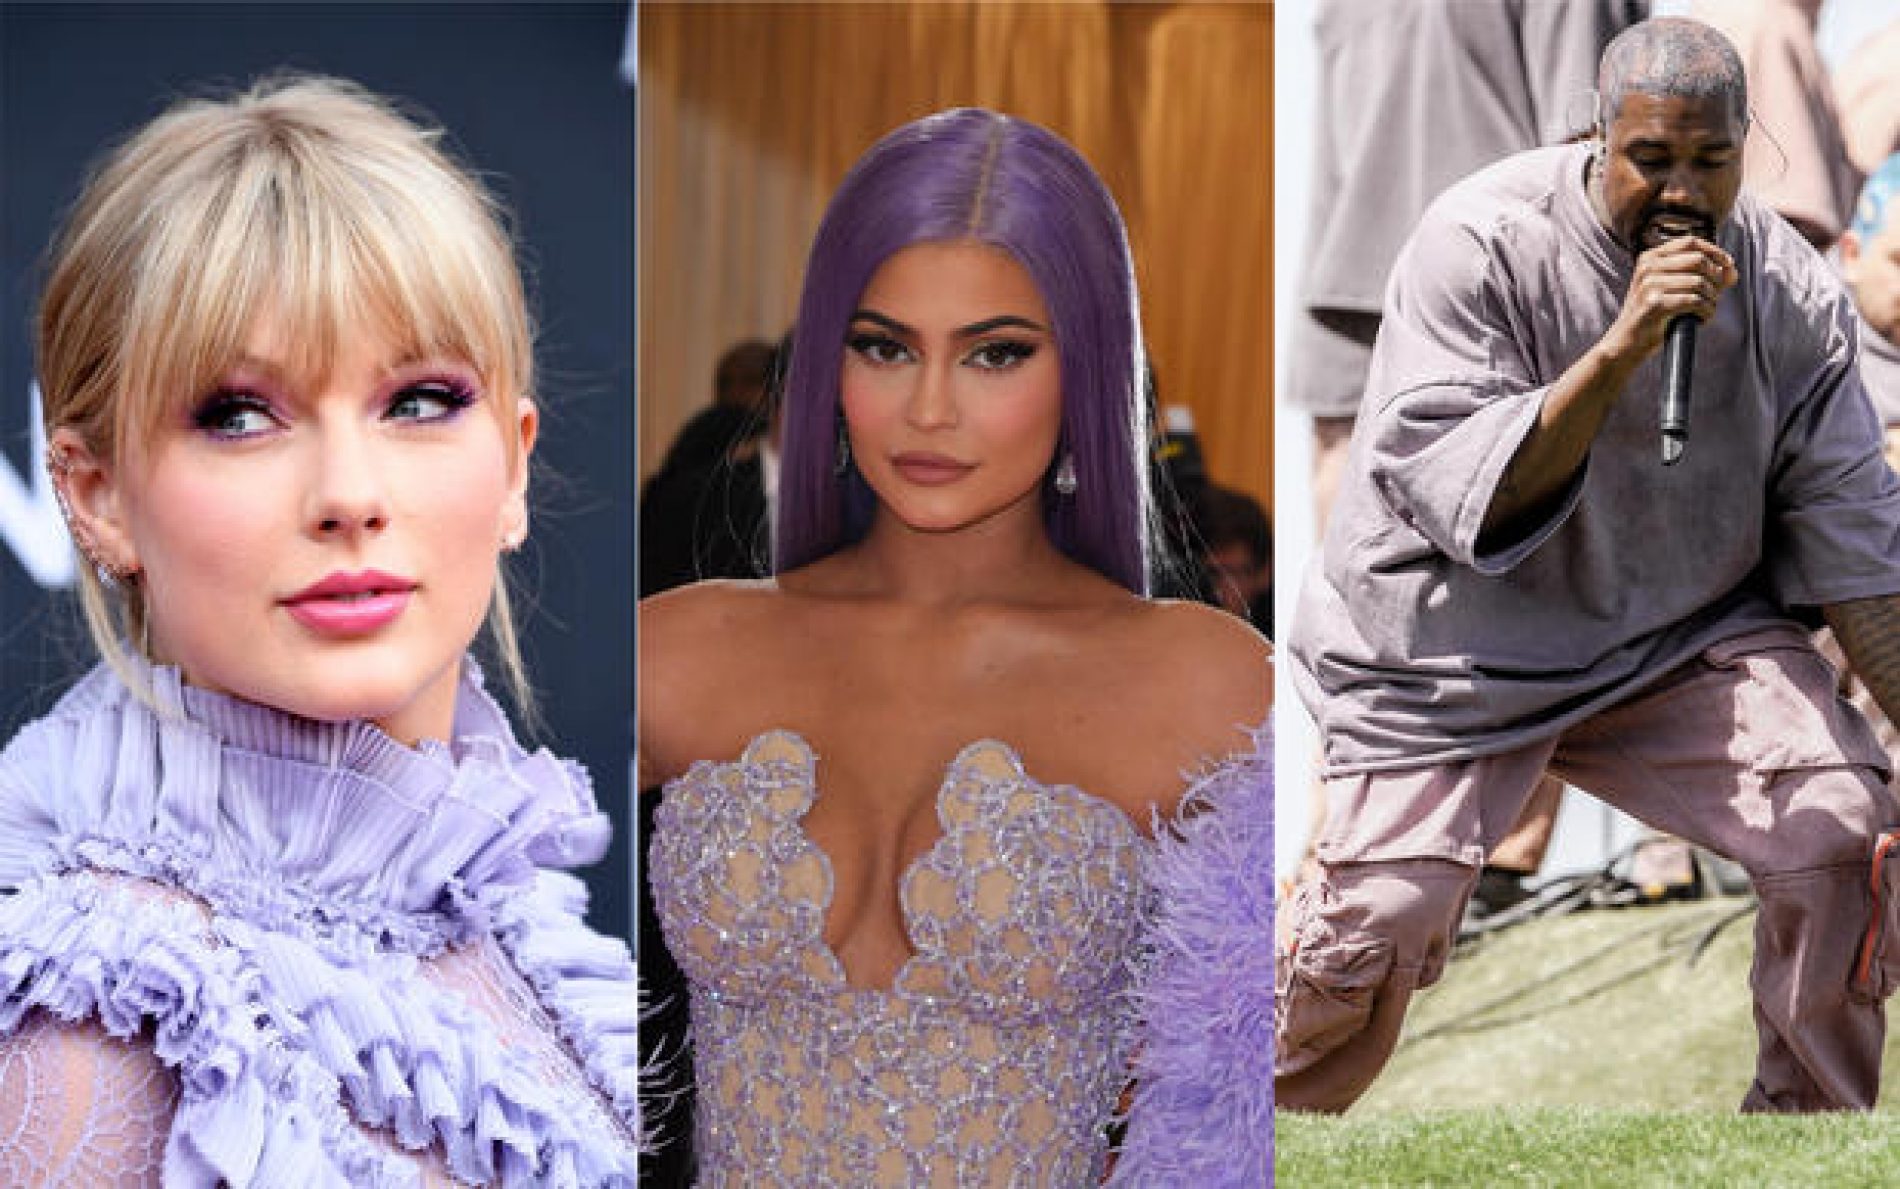 Taylor Swift, Kylie Jenner, Kanye West make Forbes’ list of 100 highest-paid entertainers